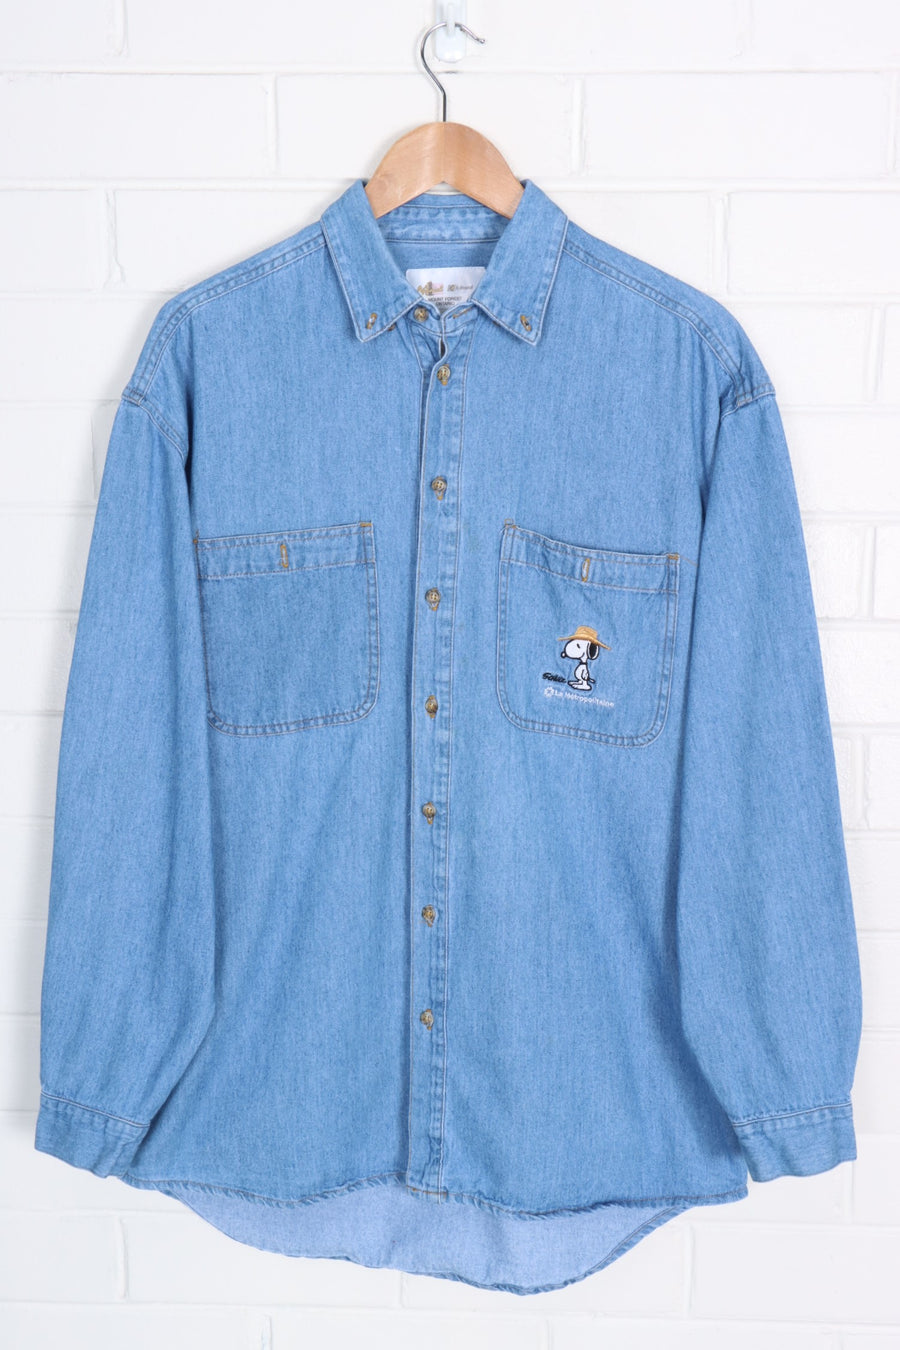 Snoopy Peanuts Embroidered Denim Shirt Canadian Made (L-XL)